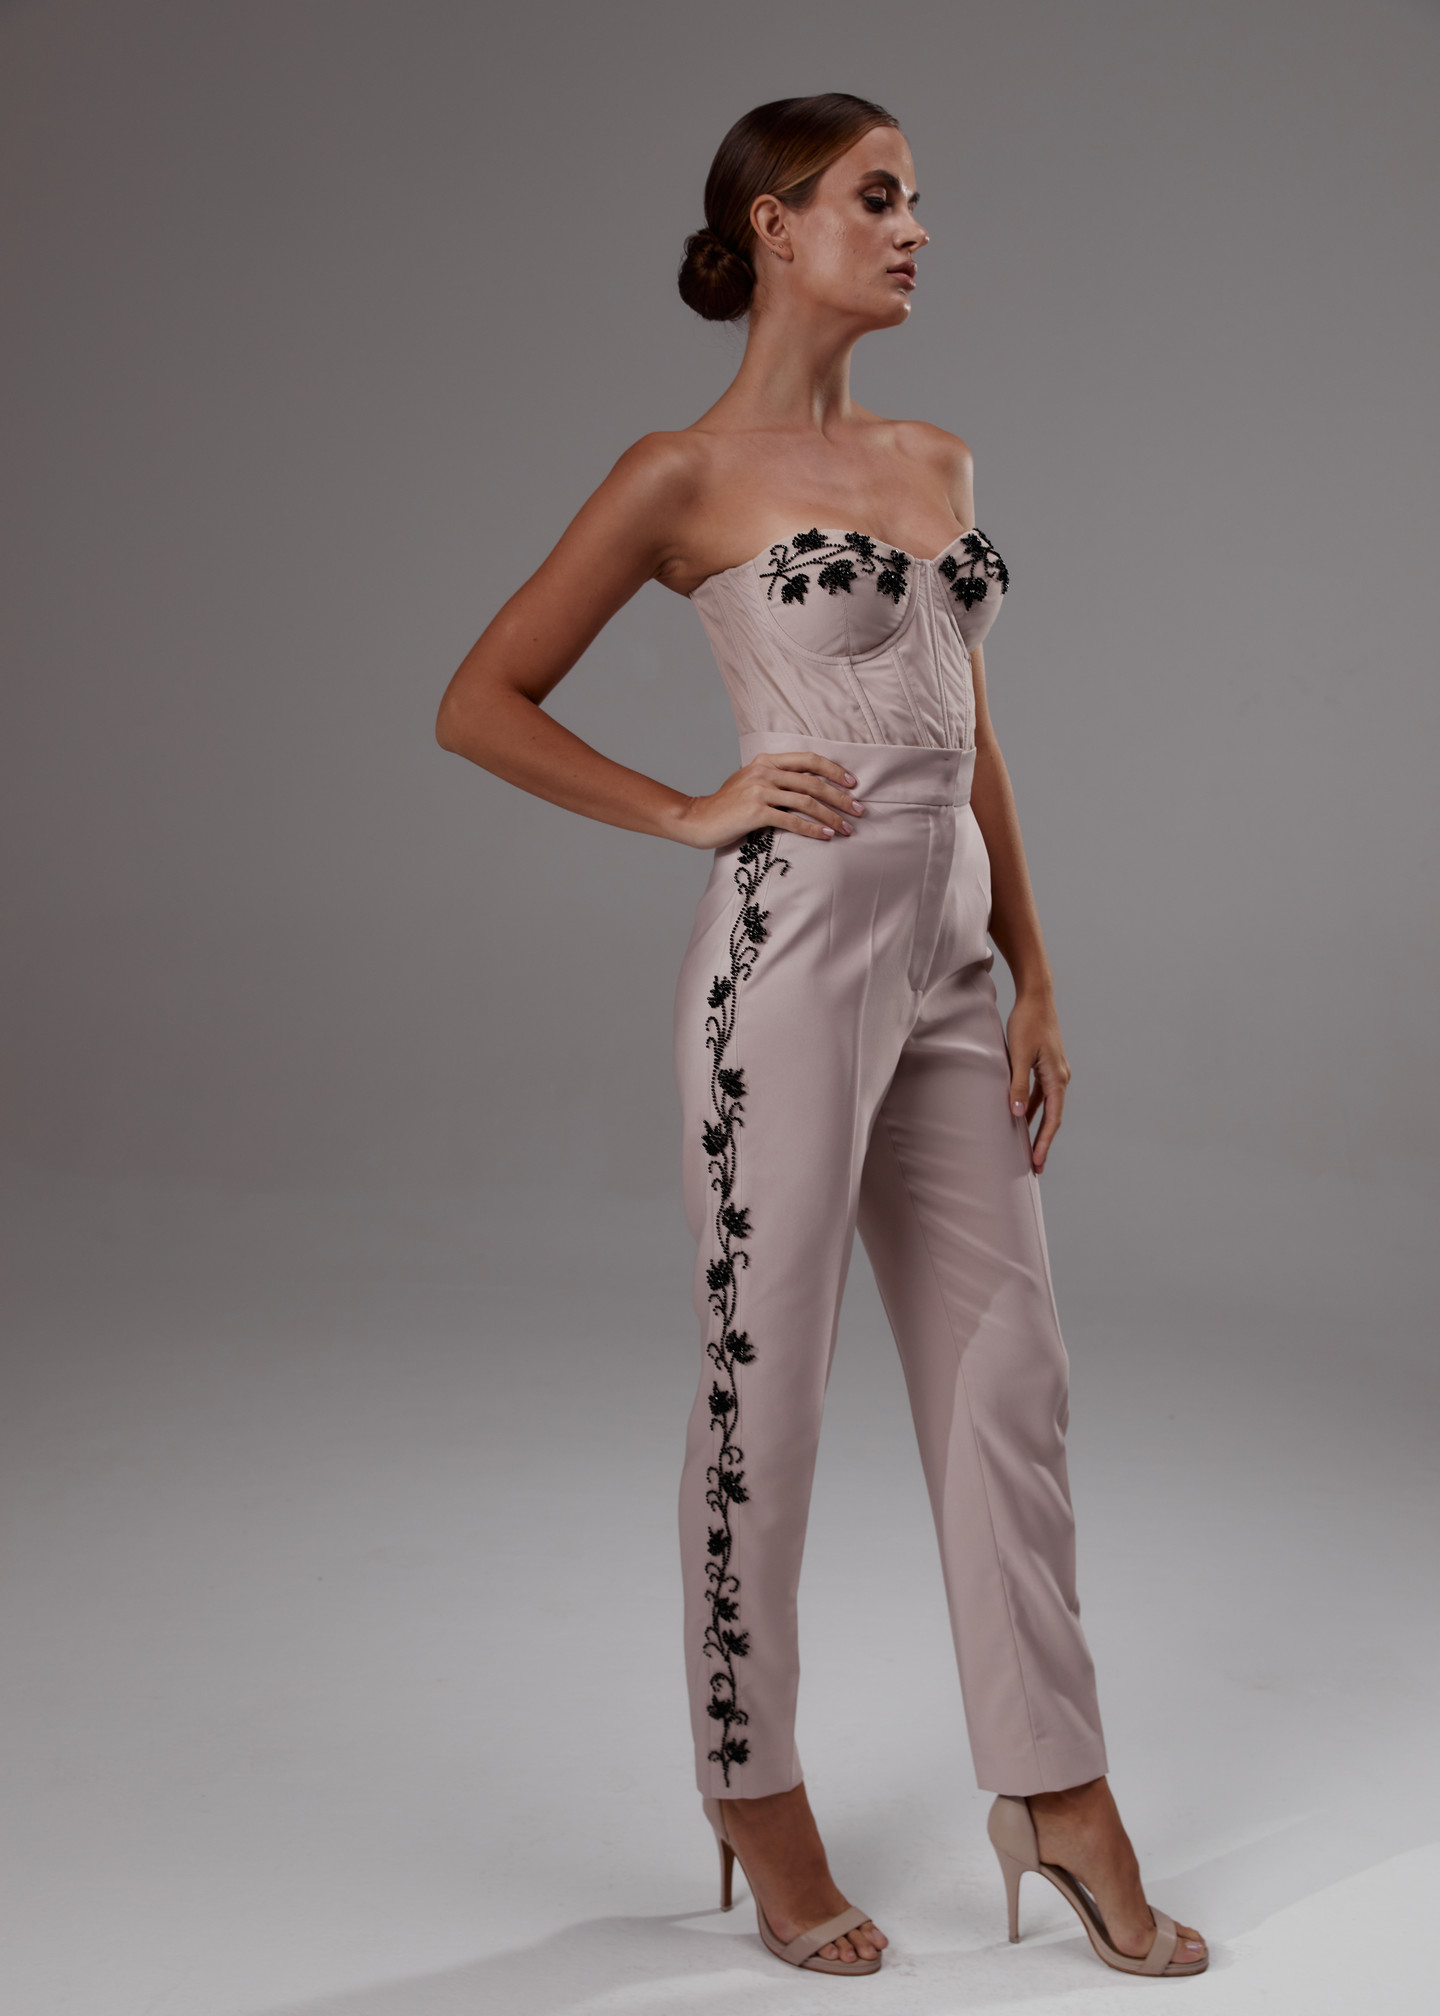 Beaded trousers of nude color, 2023, couture, trousers, evening, nude color, beaded suit of nude color, embroidery